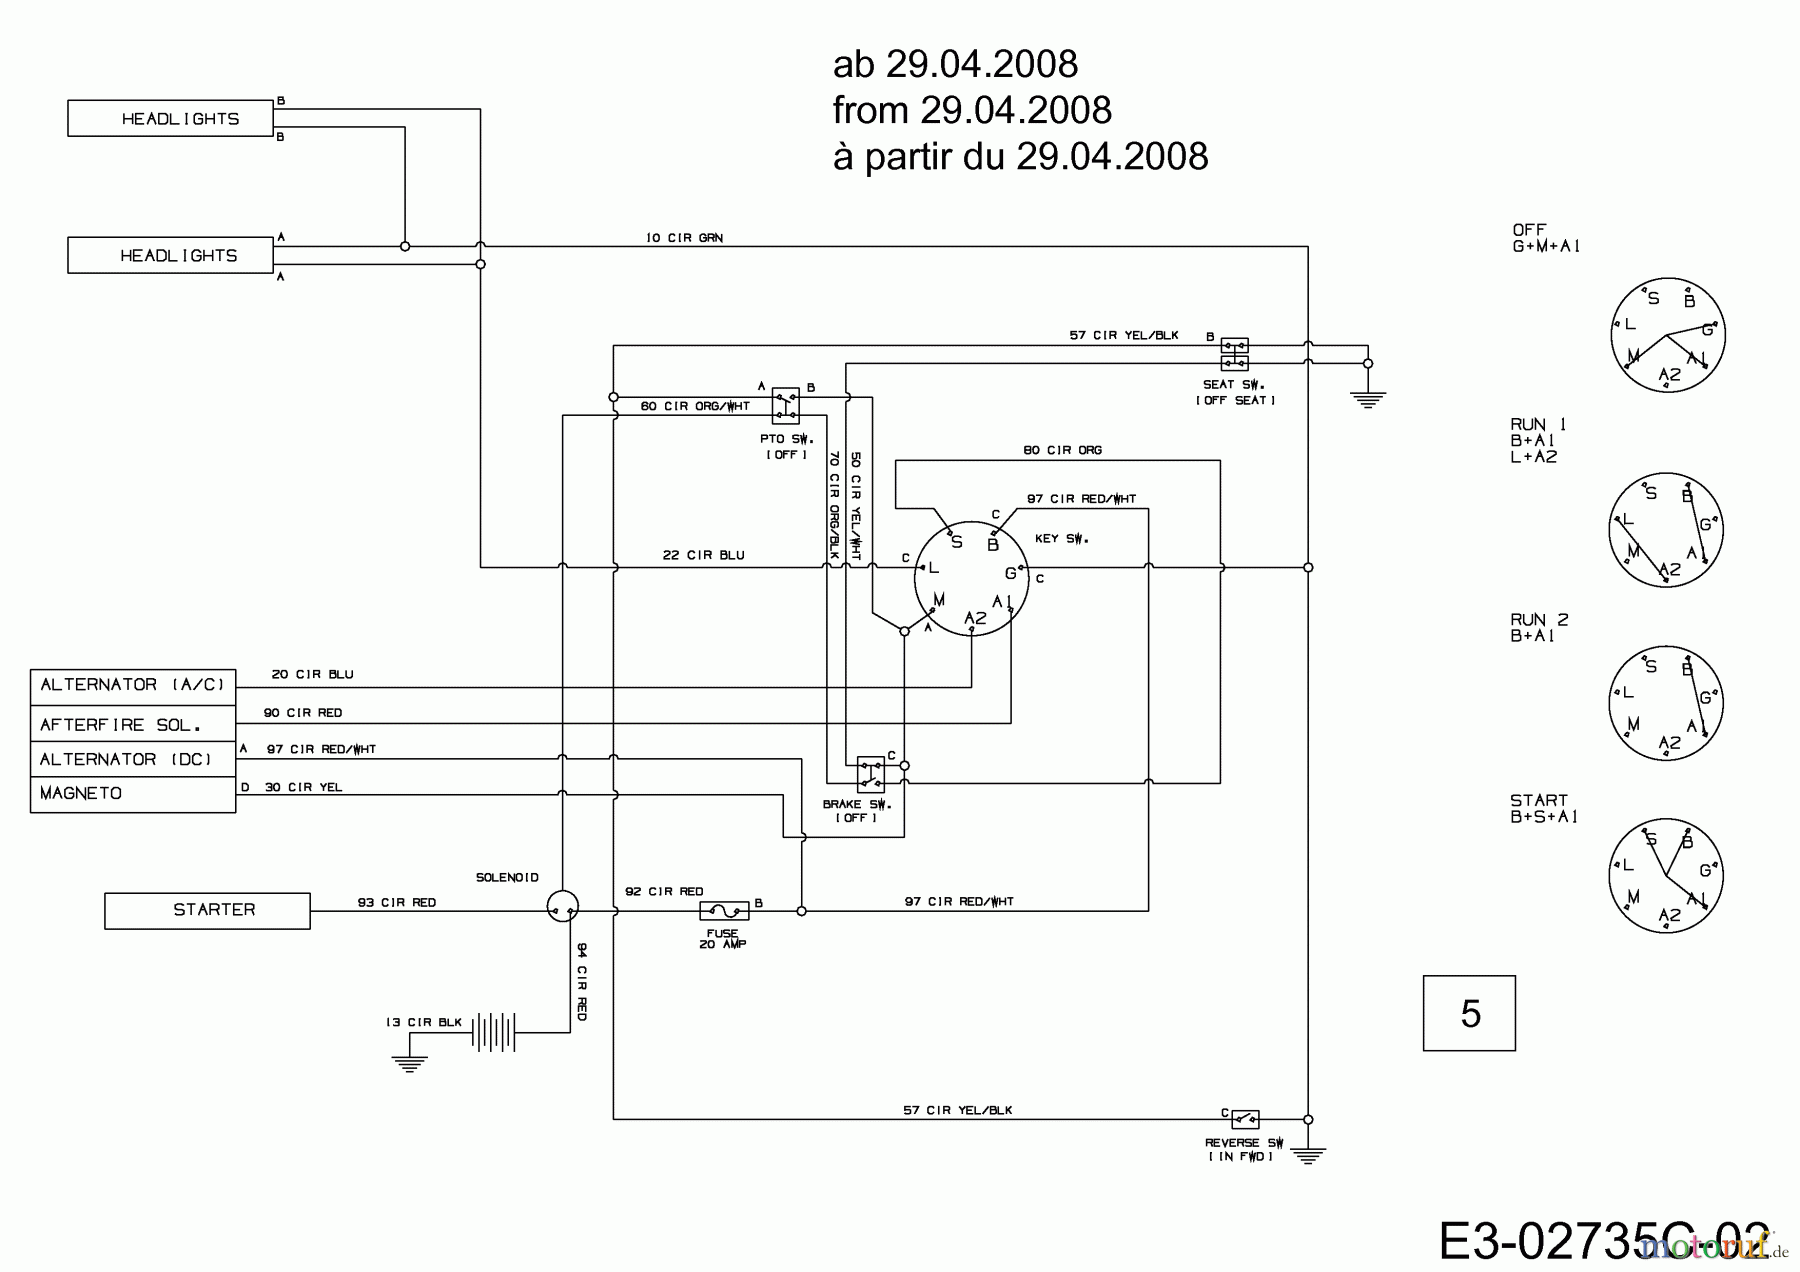  Staub Lawn tractors SAEL 108/15,5 H 13AM79KG632  (2009) Wiring diagram from 29.04.2008